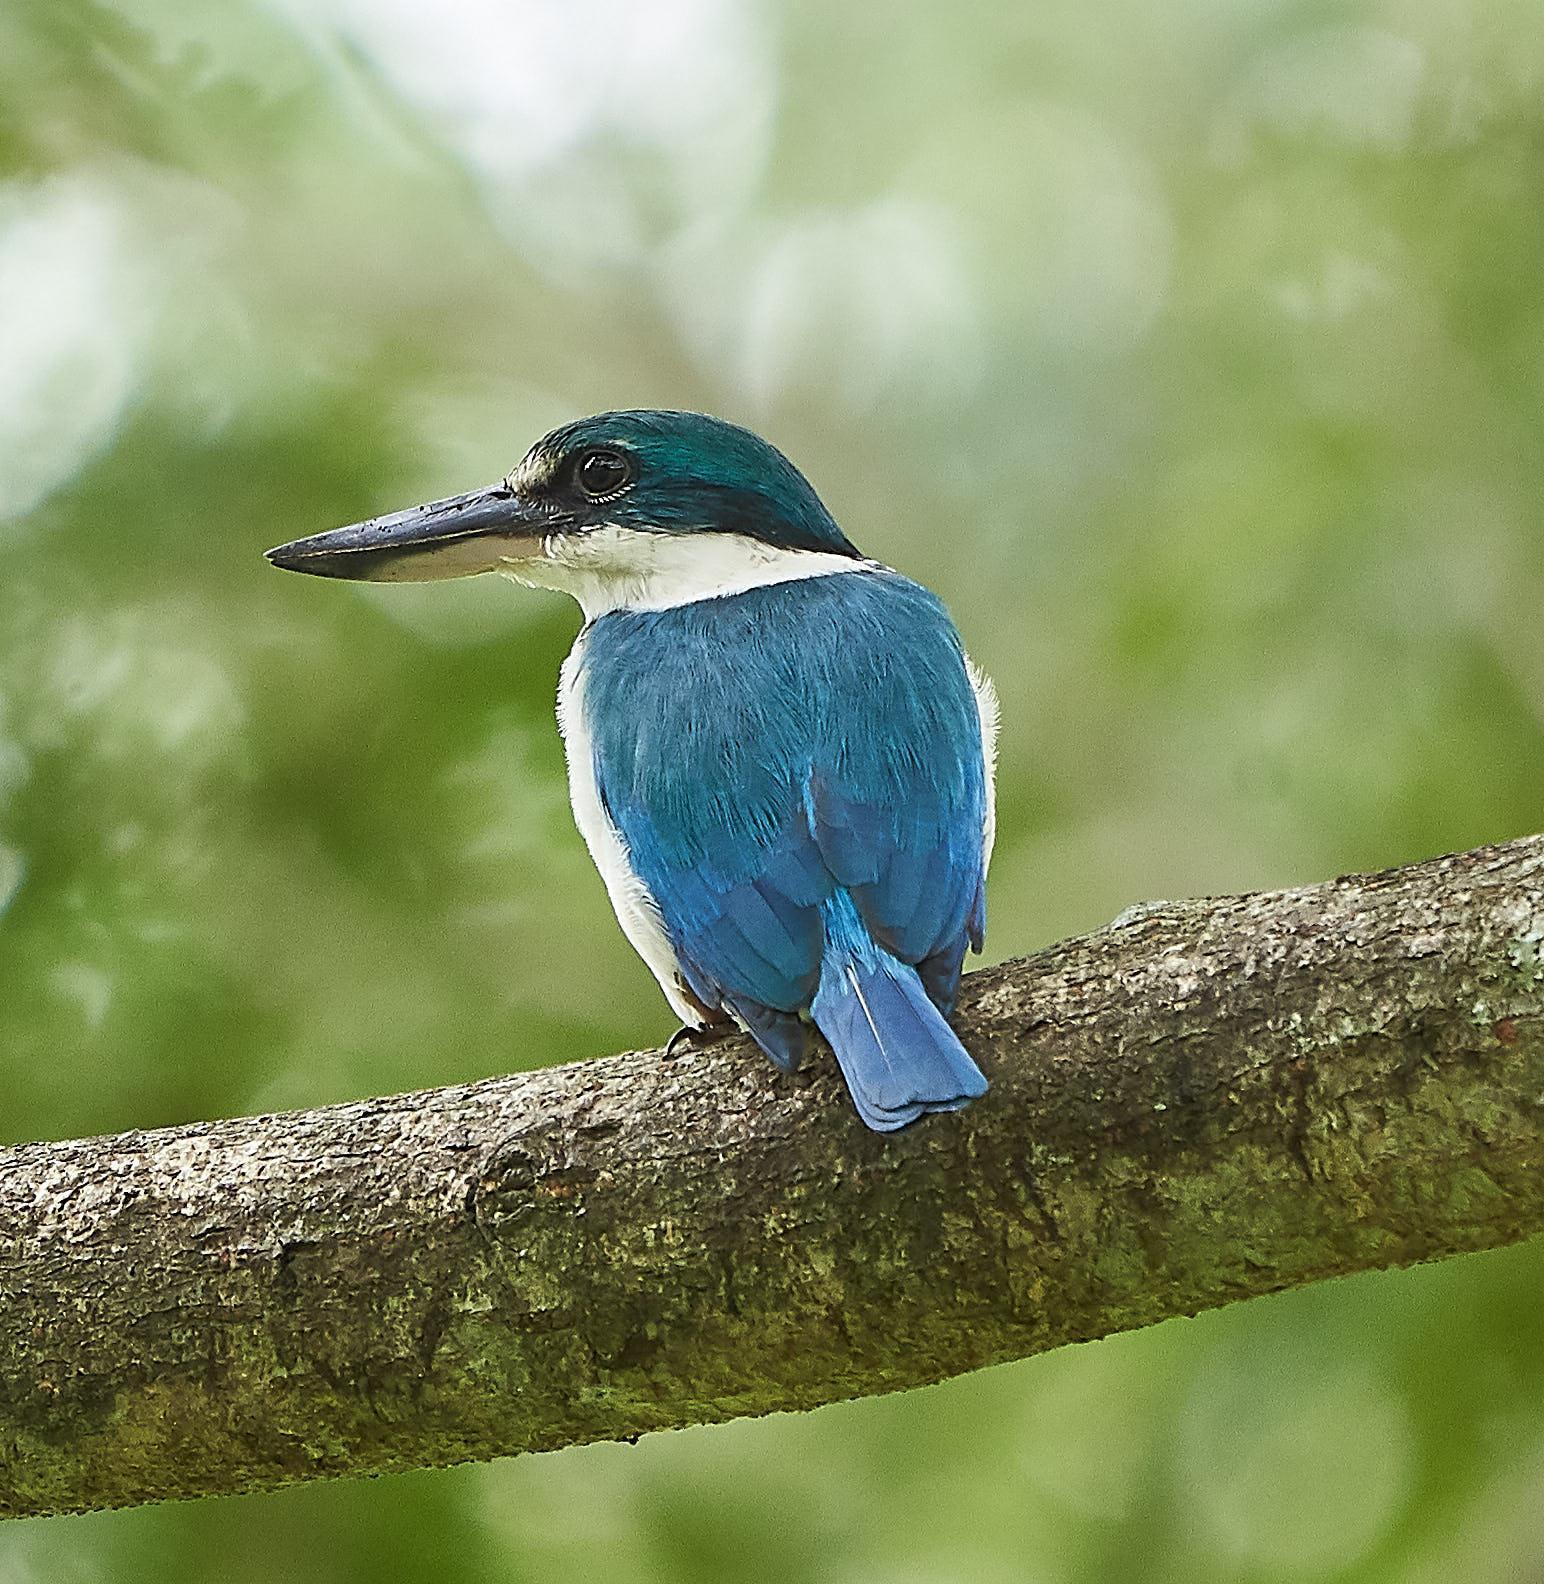 Collared Kingfisher Photo by Steven Cheong